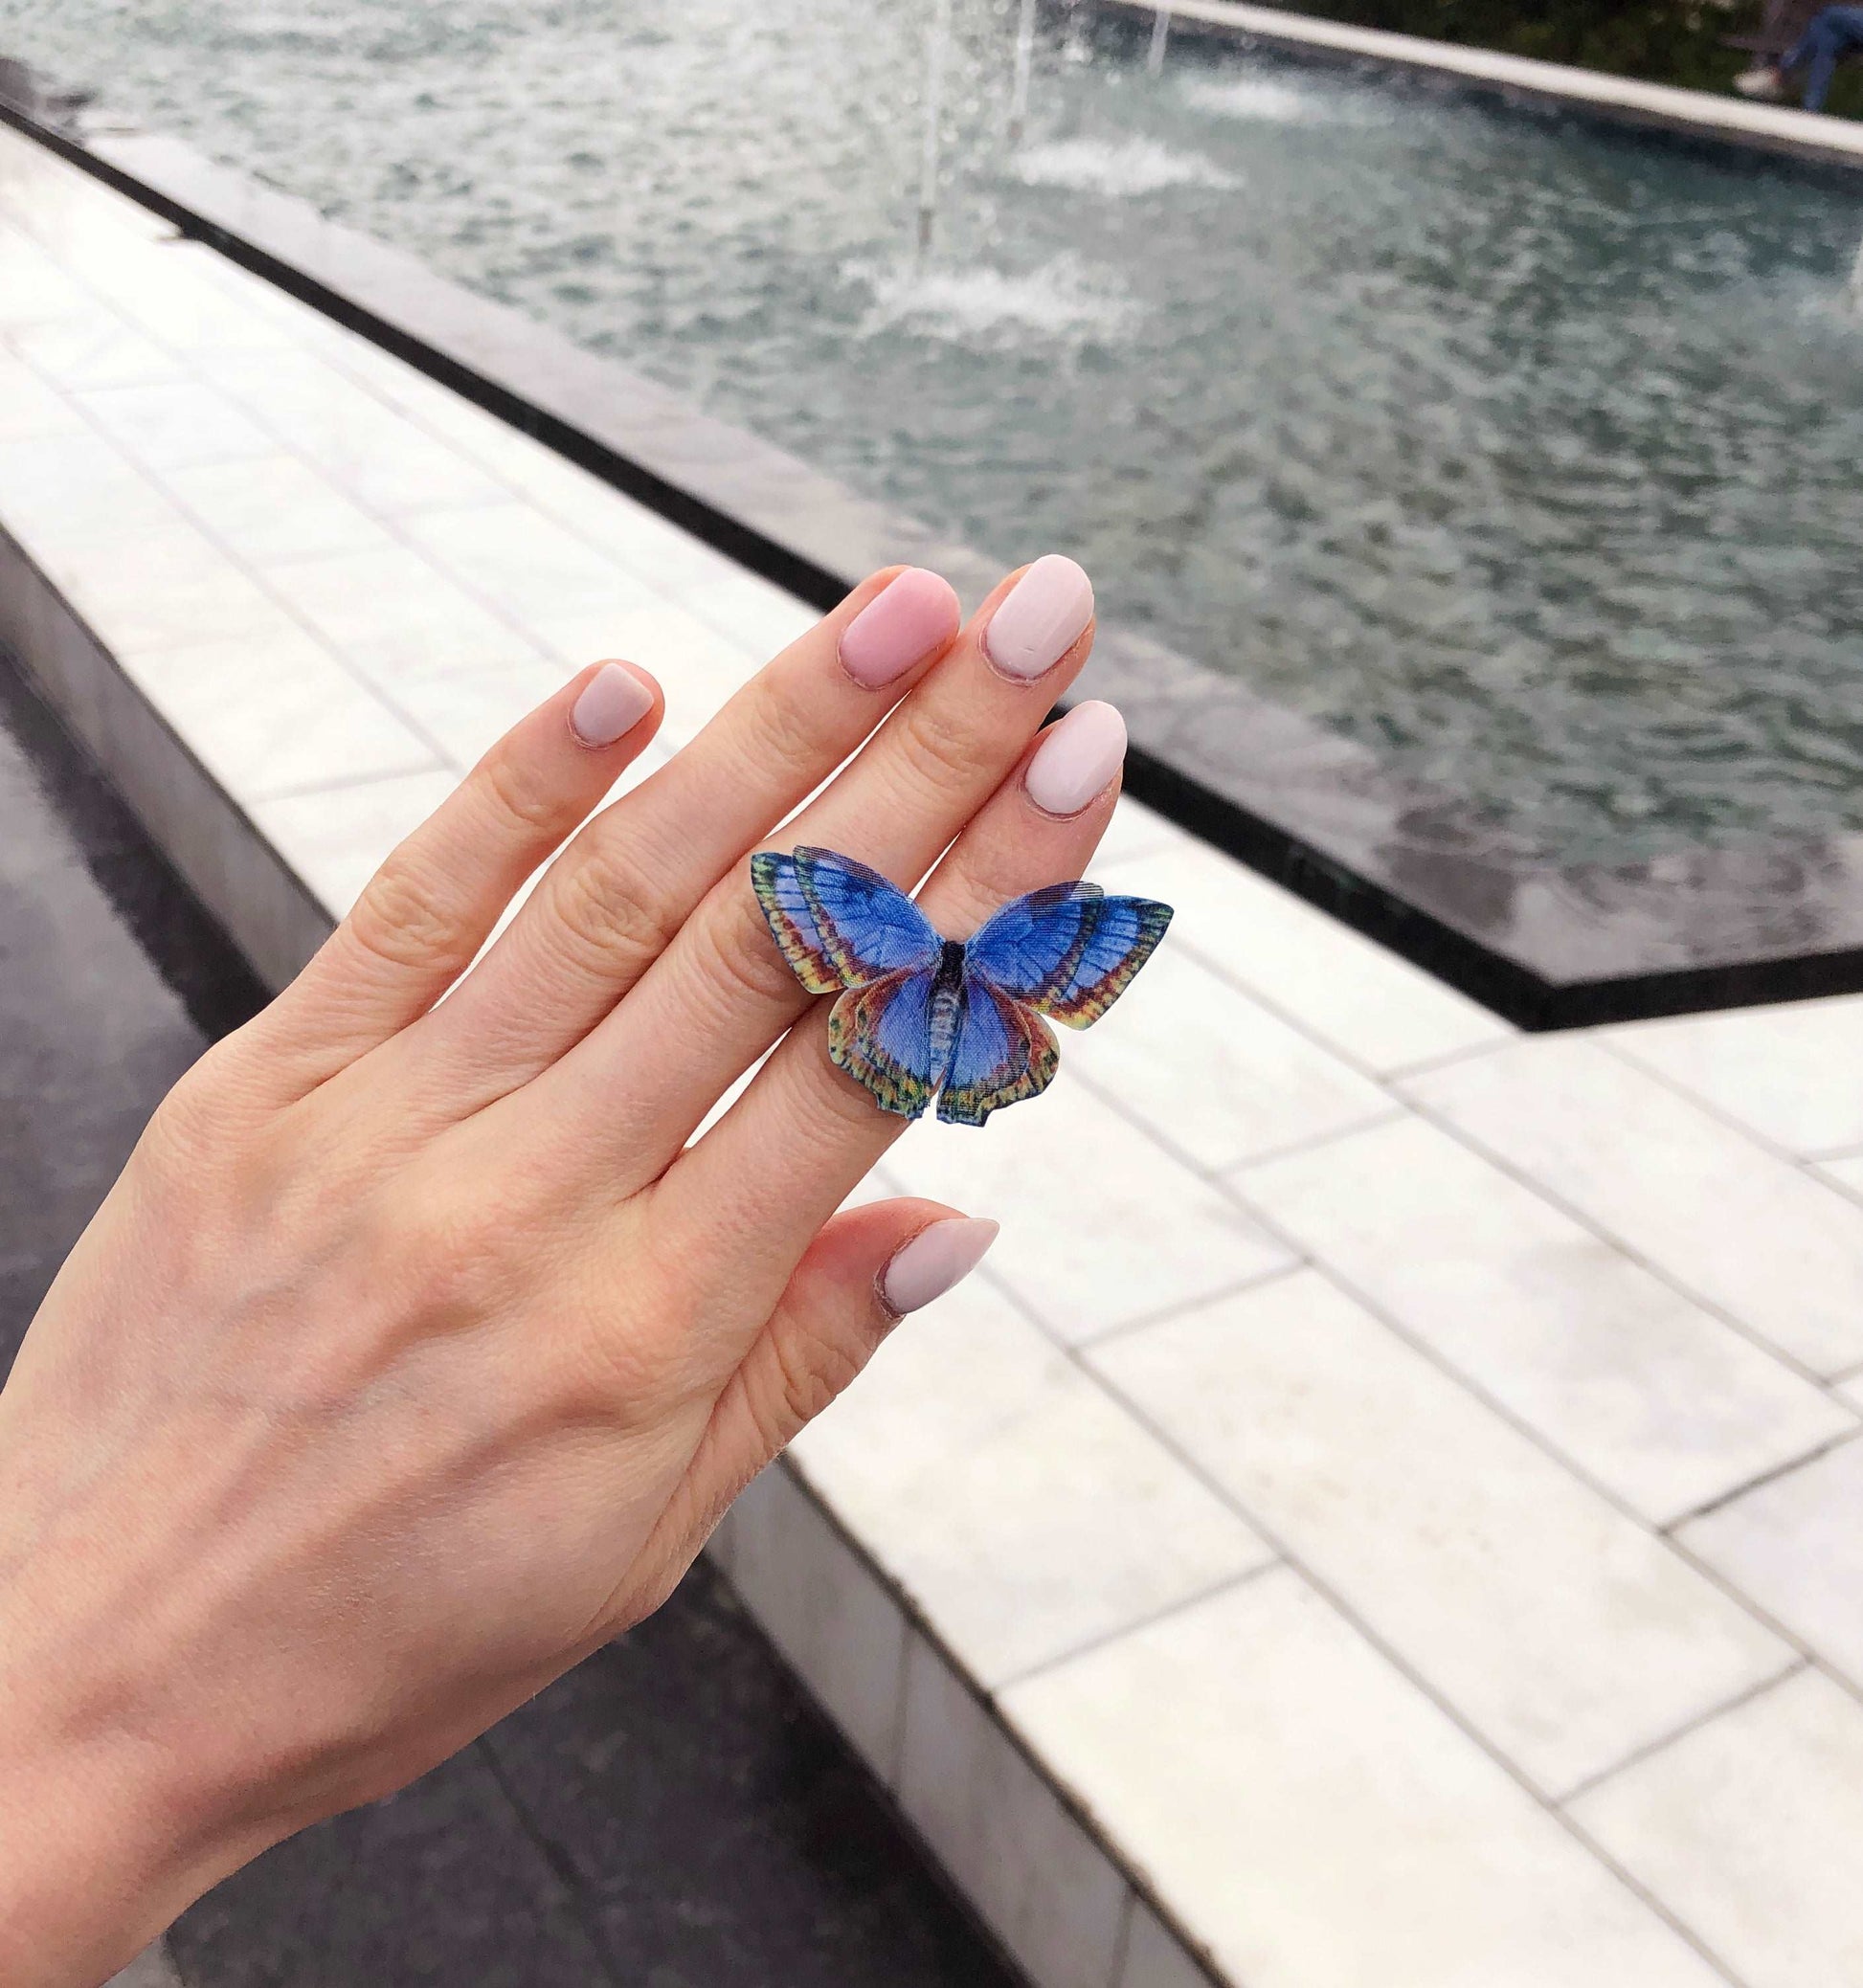 Indigo Blue Butterfly Ring - Handcrafted Insect Jewelry with Faux Silk Butterfly on Natural Background, Statement Ring for Entomology Enthusiasts